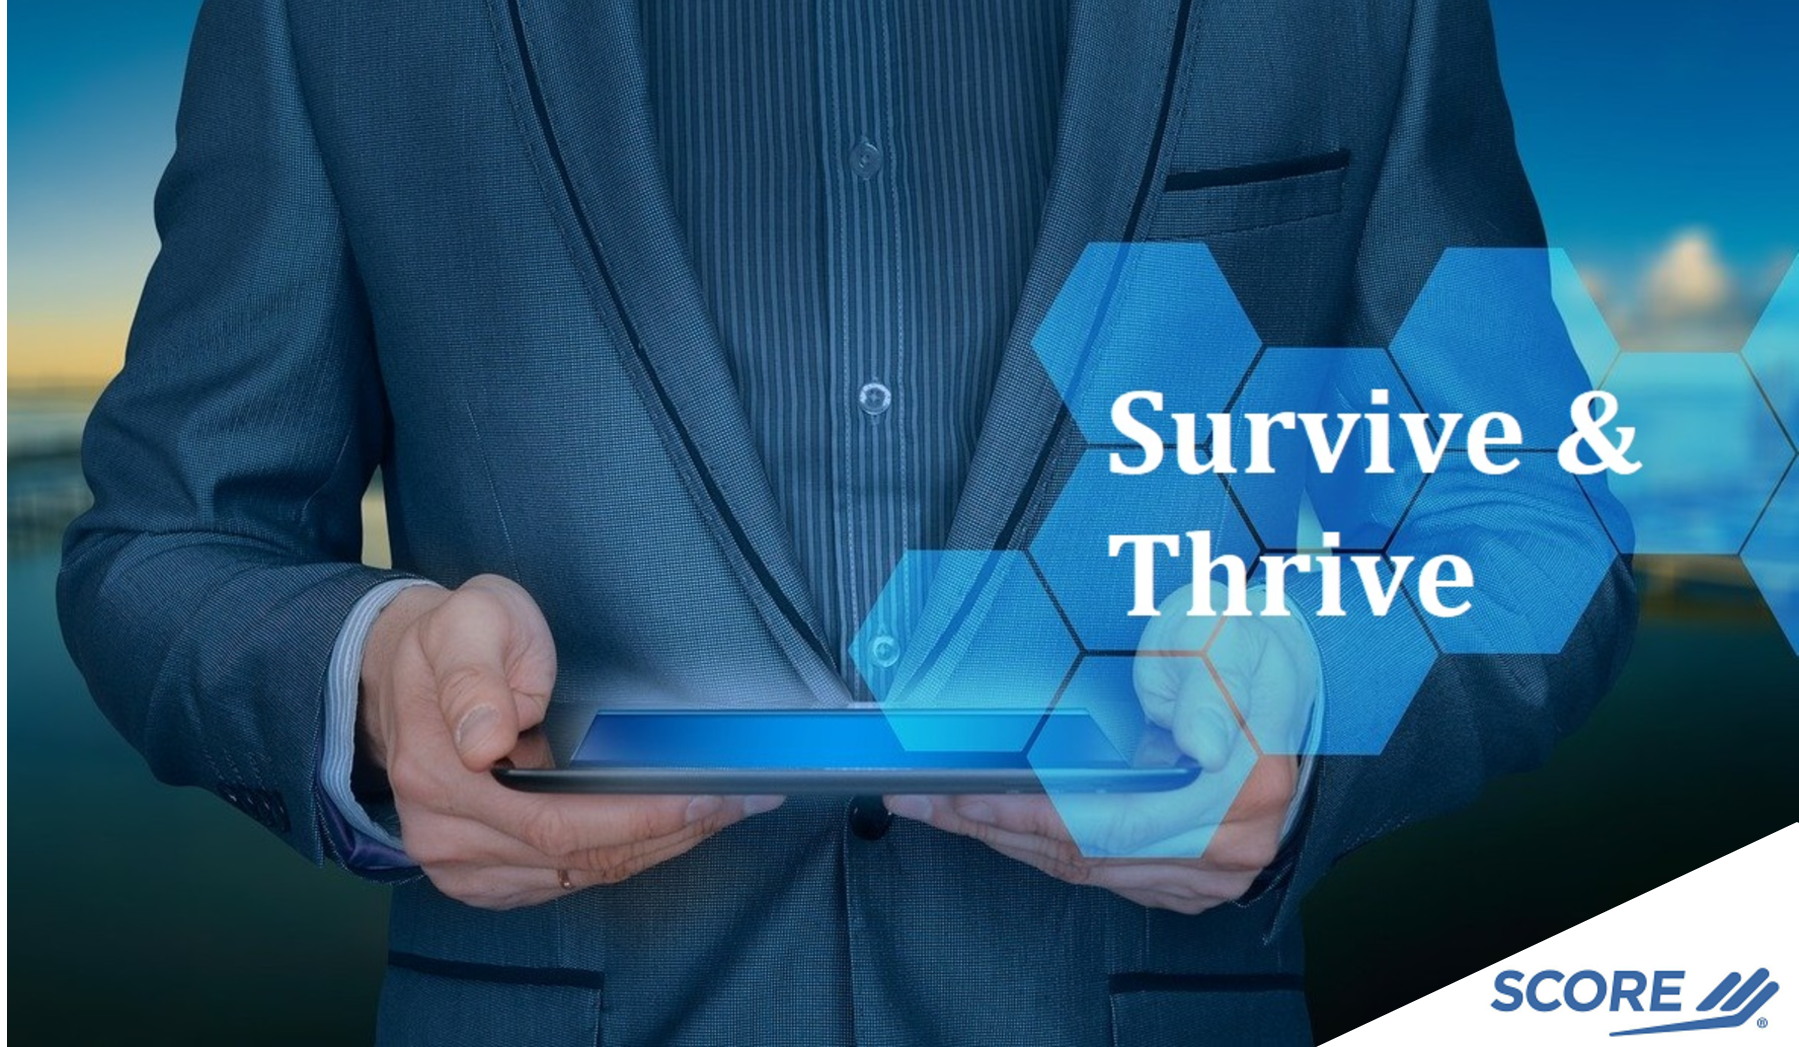 SCORE Manasota Introduces a New Virtual Forum Series – Survive & Thrive in 2021